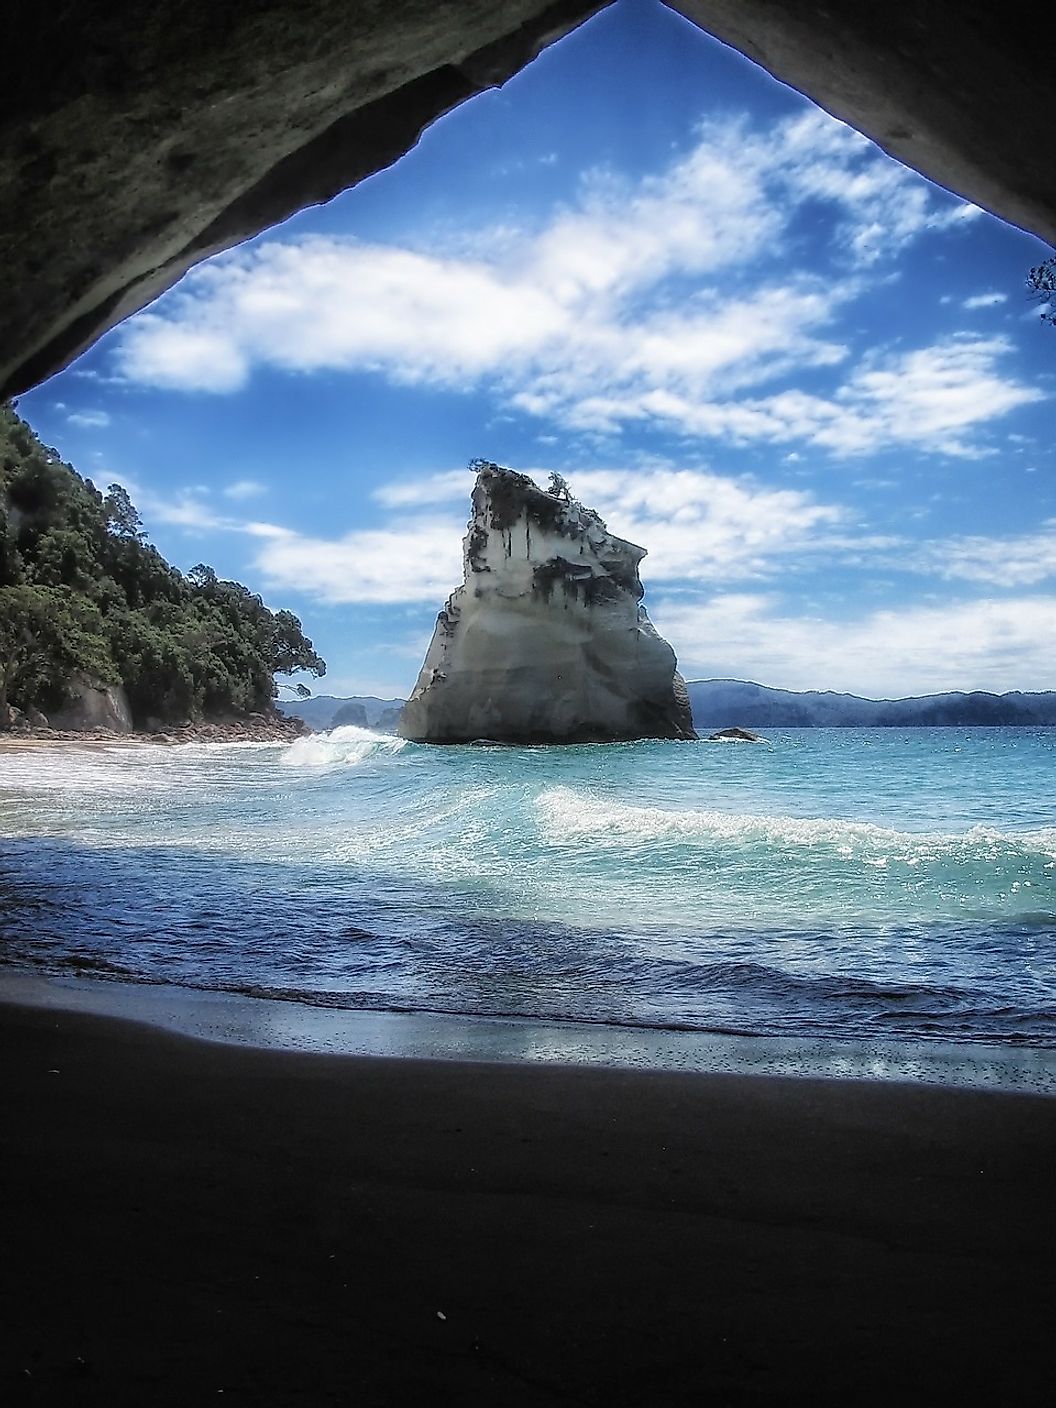 A view of Cathedral Cove's gentle waves and blue waters, along with the rock formations which much of its wildlife also call home.